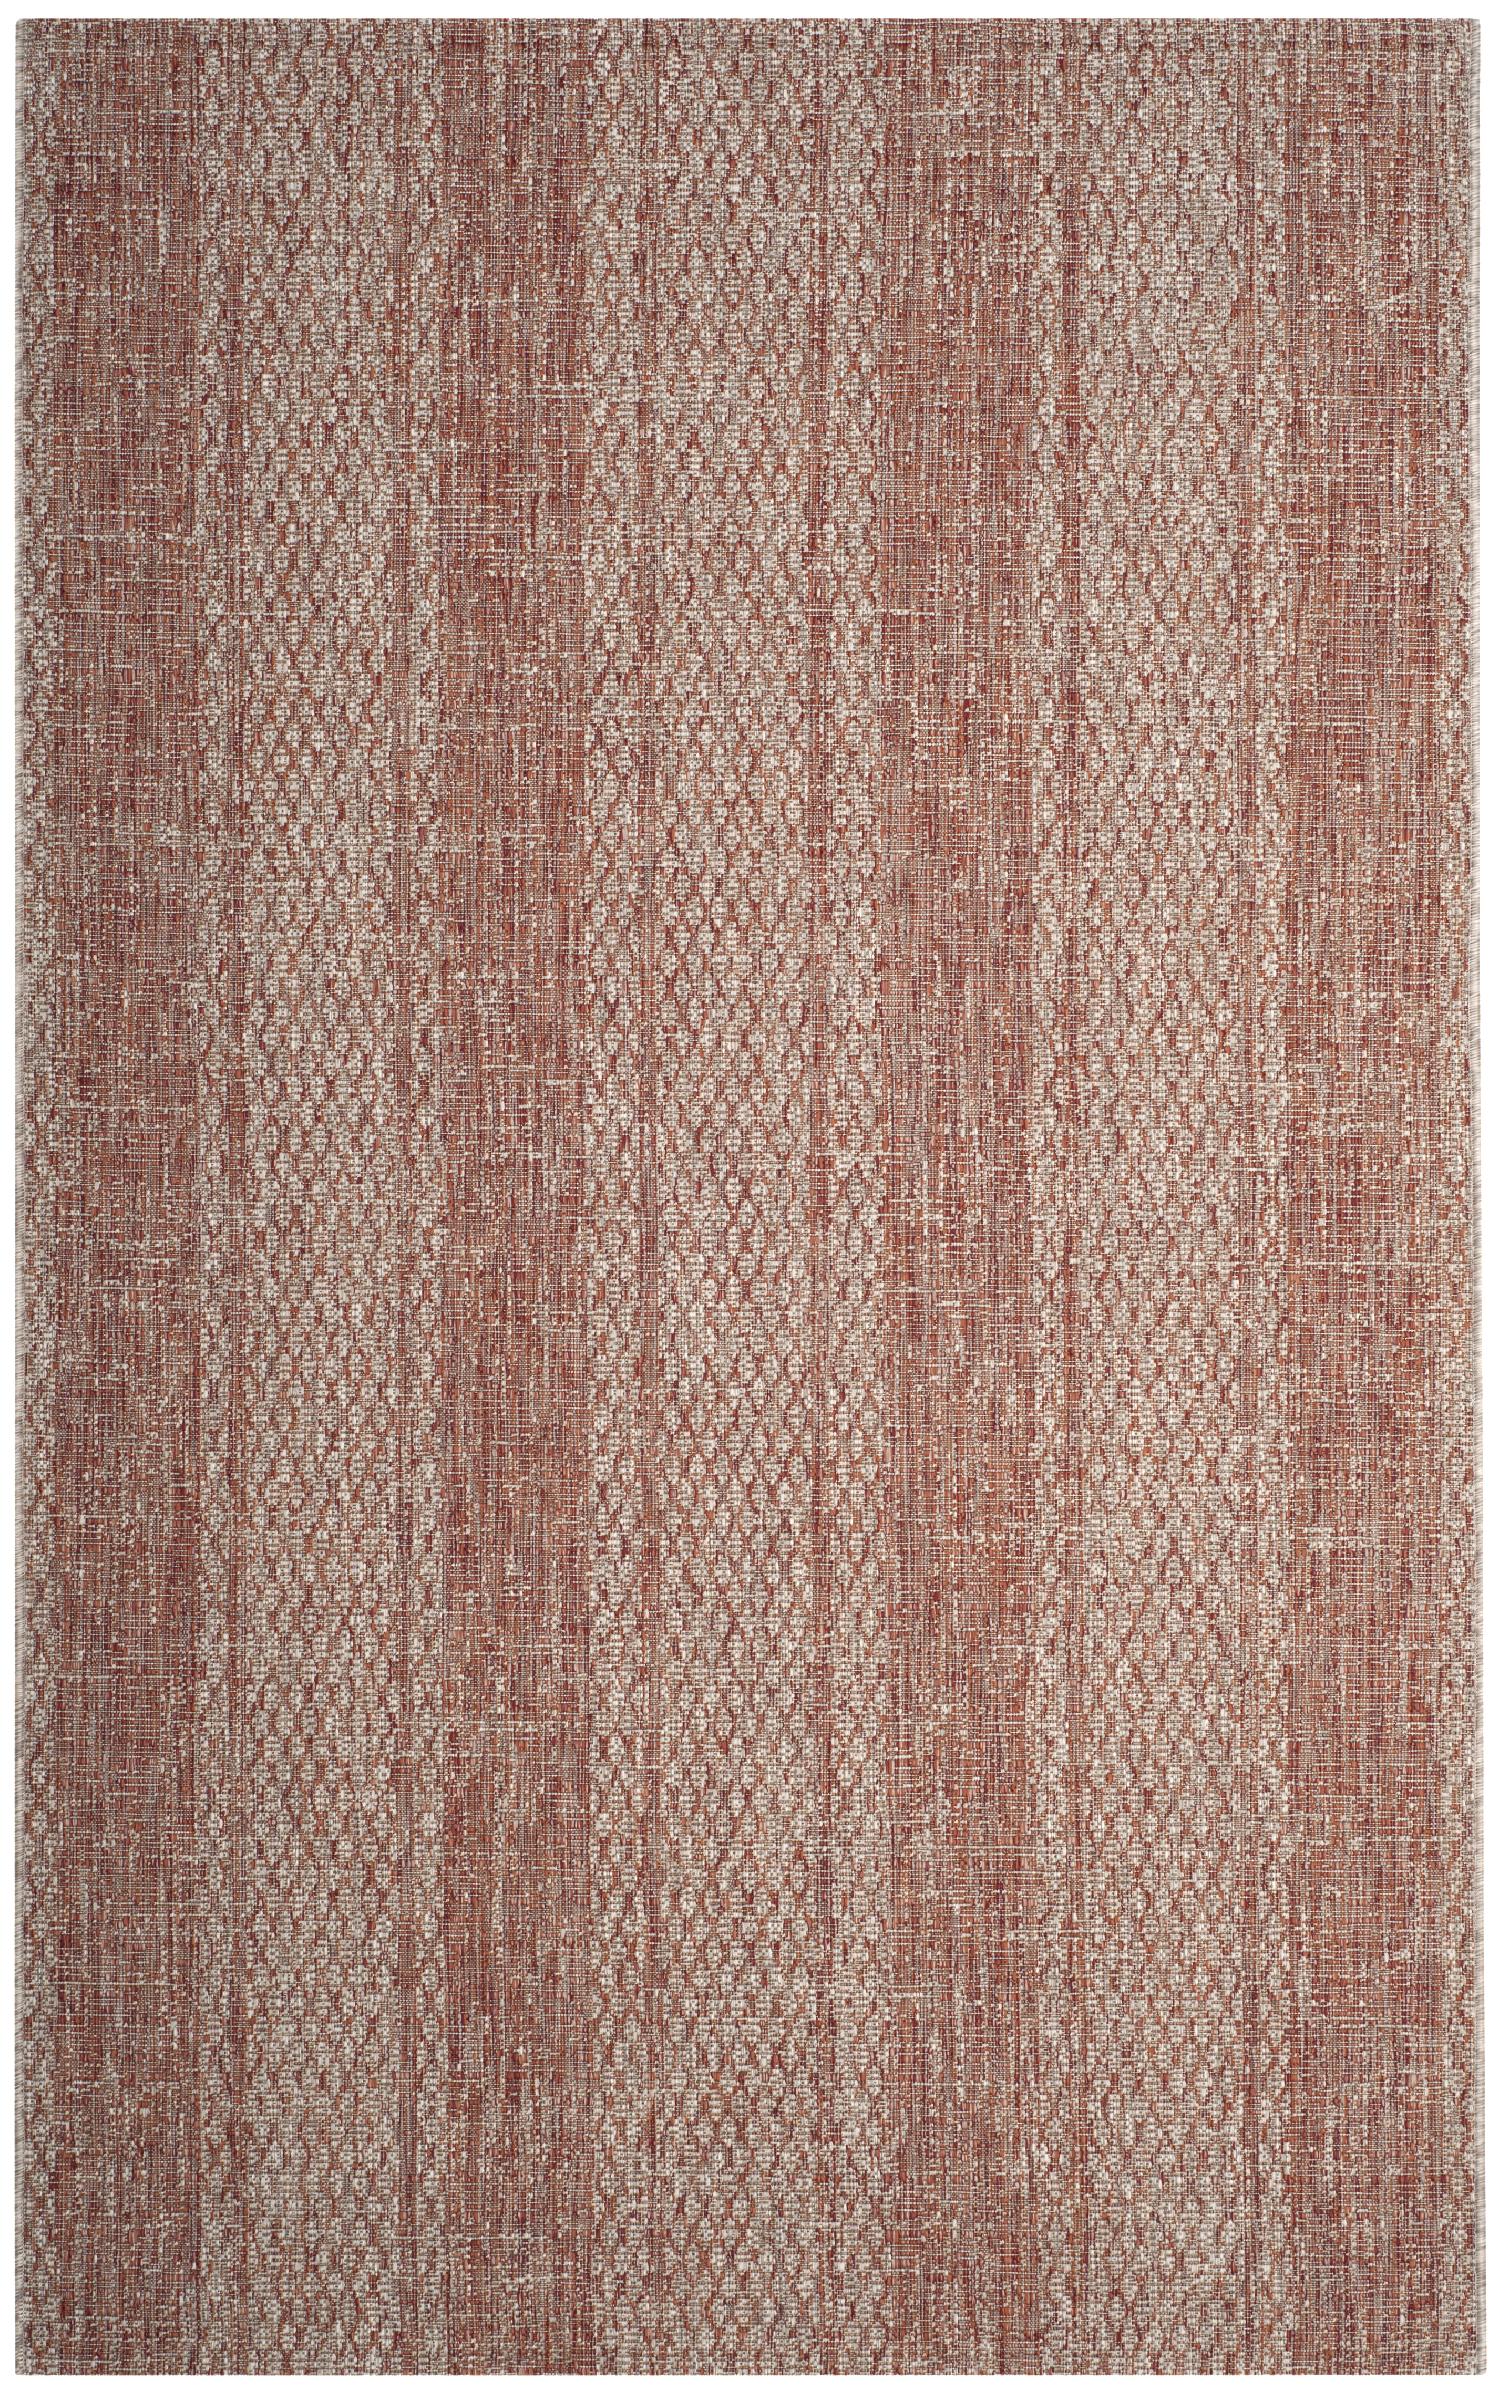 Contemporary Area Rug, CY8736-36512, 243 X 335 cm in Light Beige /  Terracotta